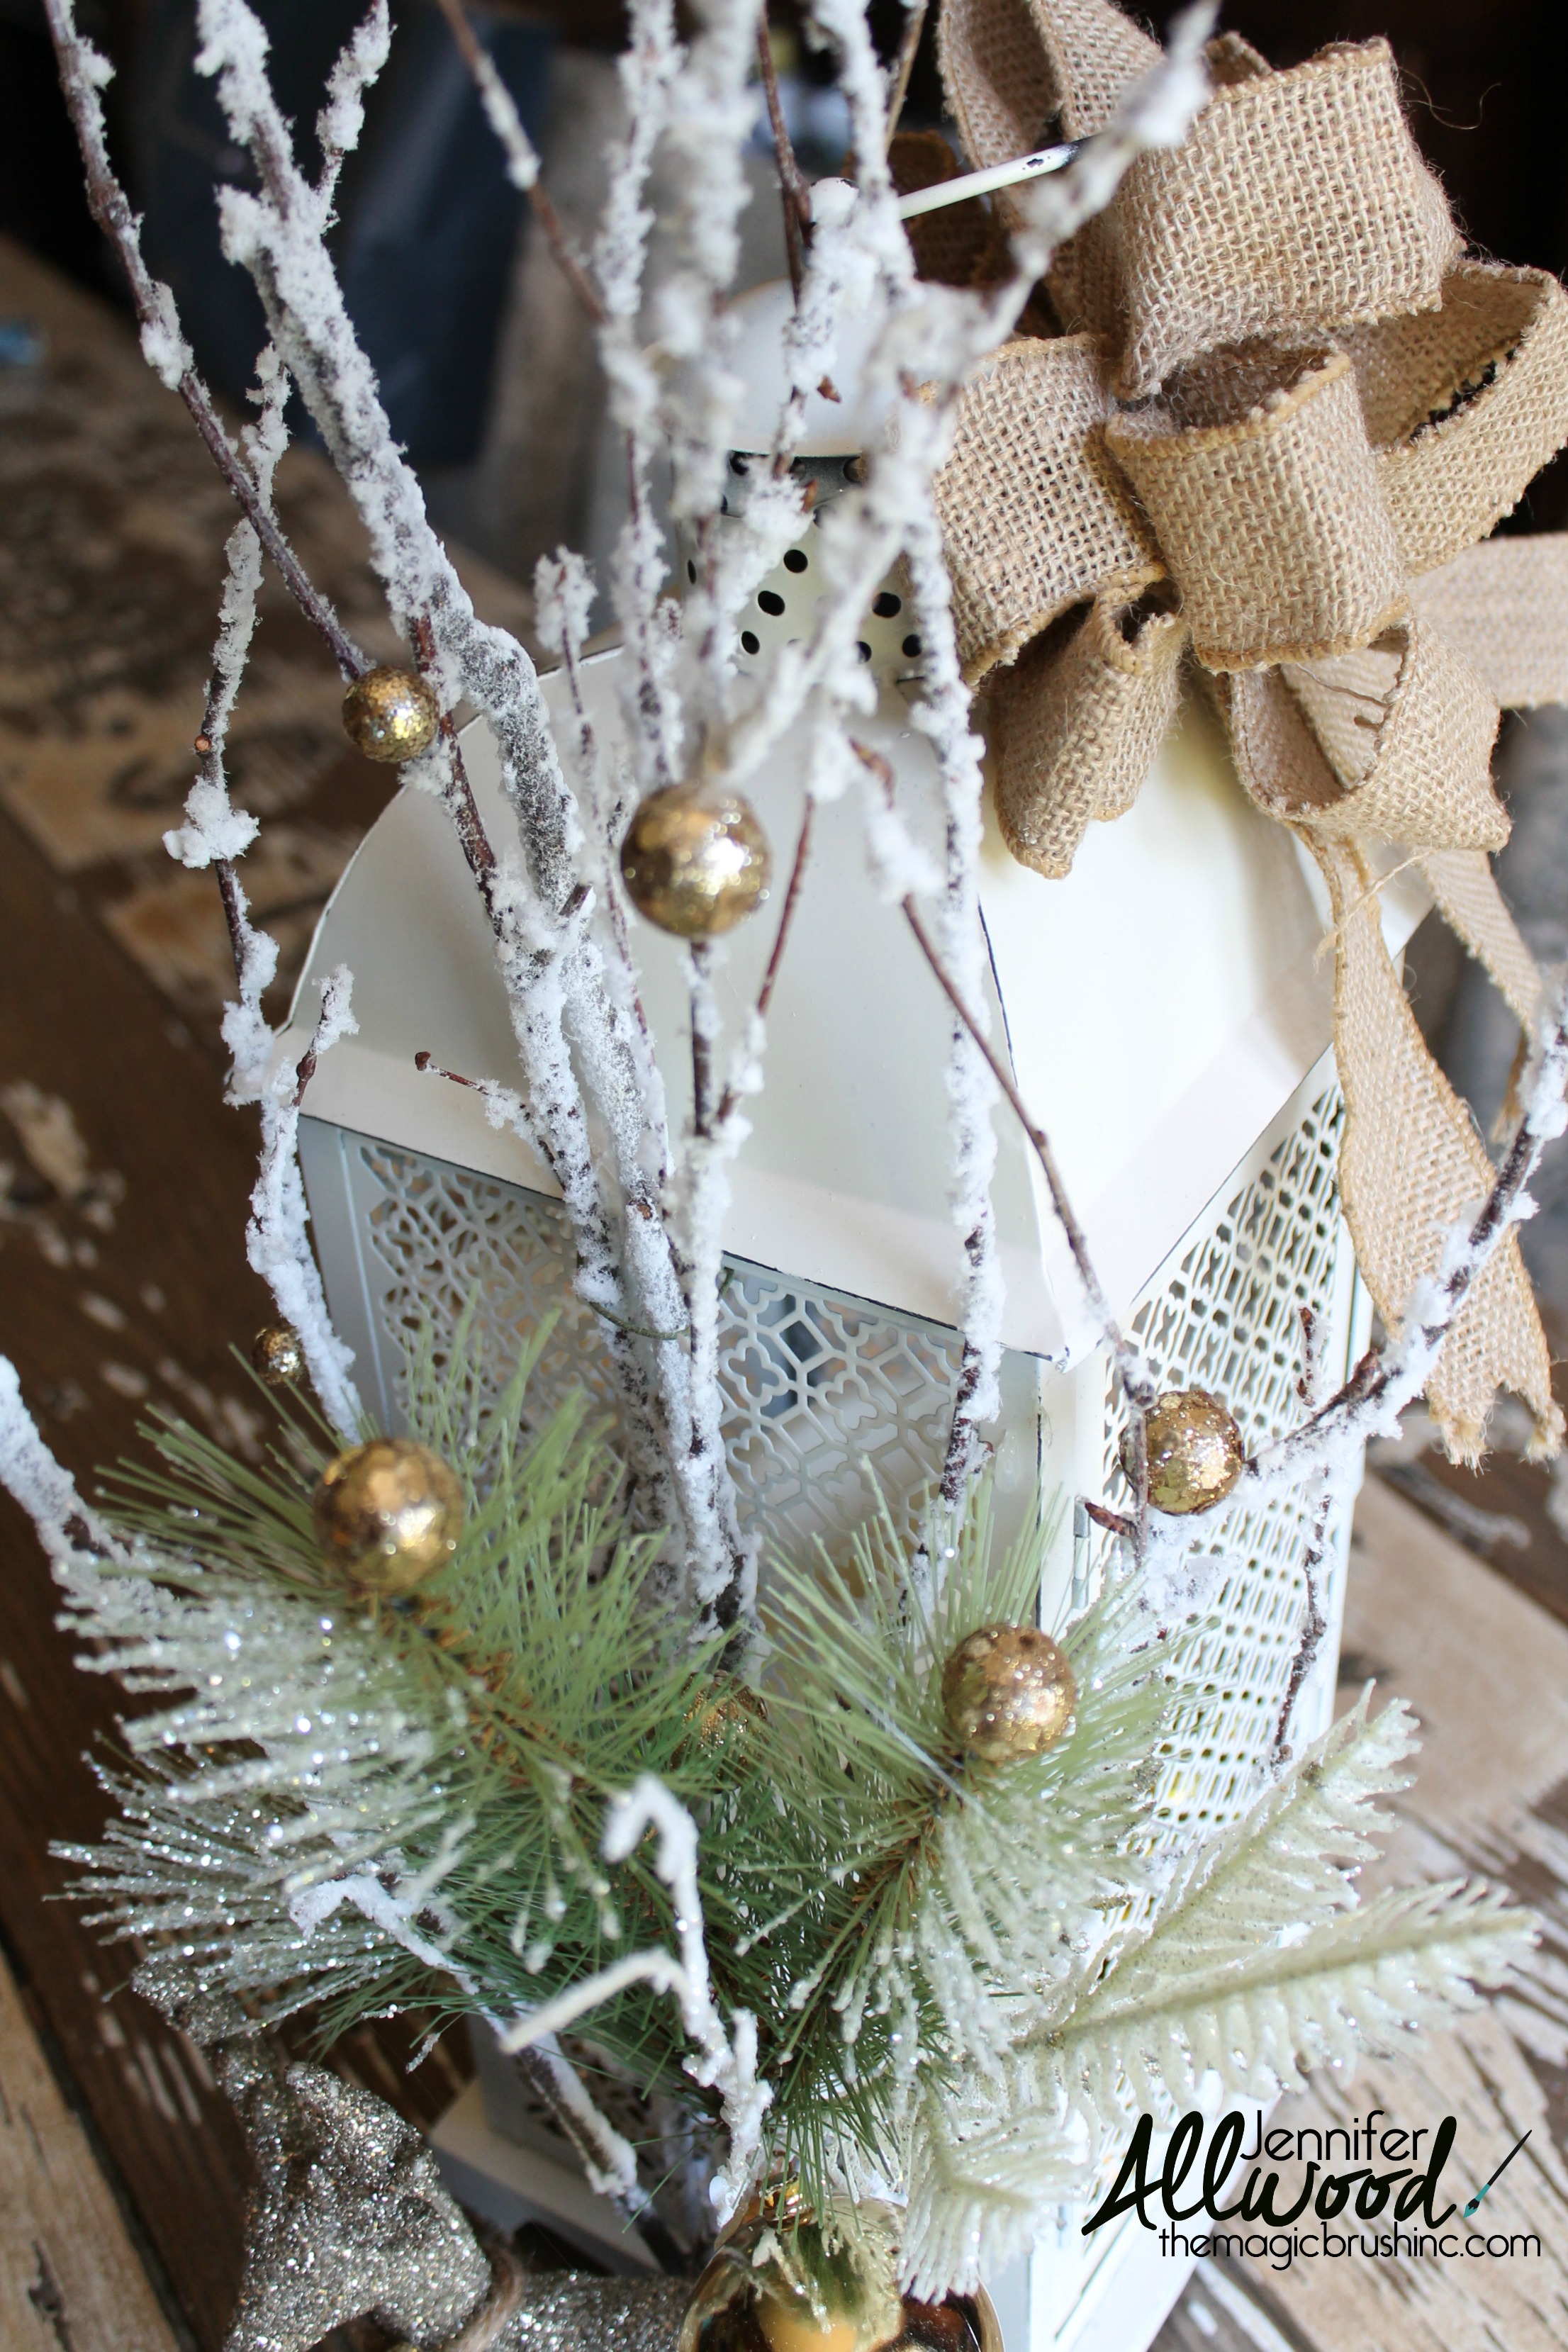 Find a Christmas lantern on clearance and decorate it for winter!